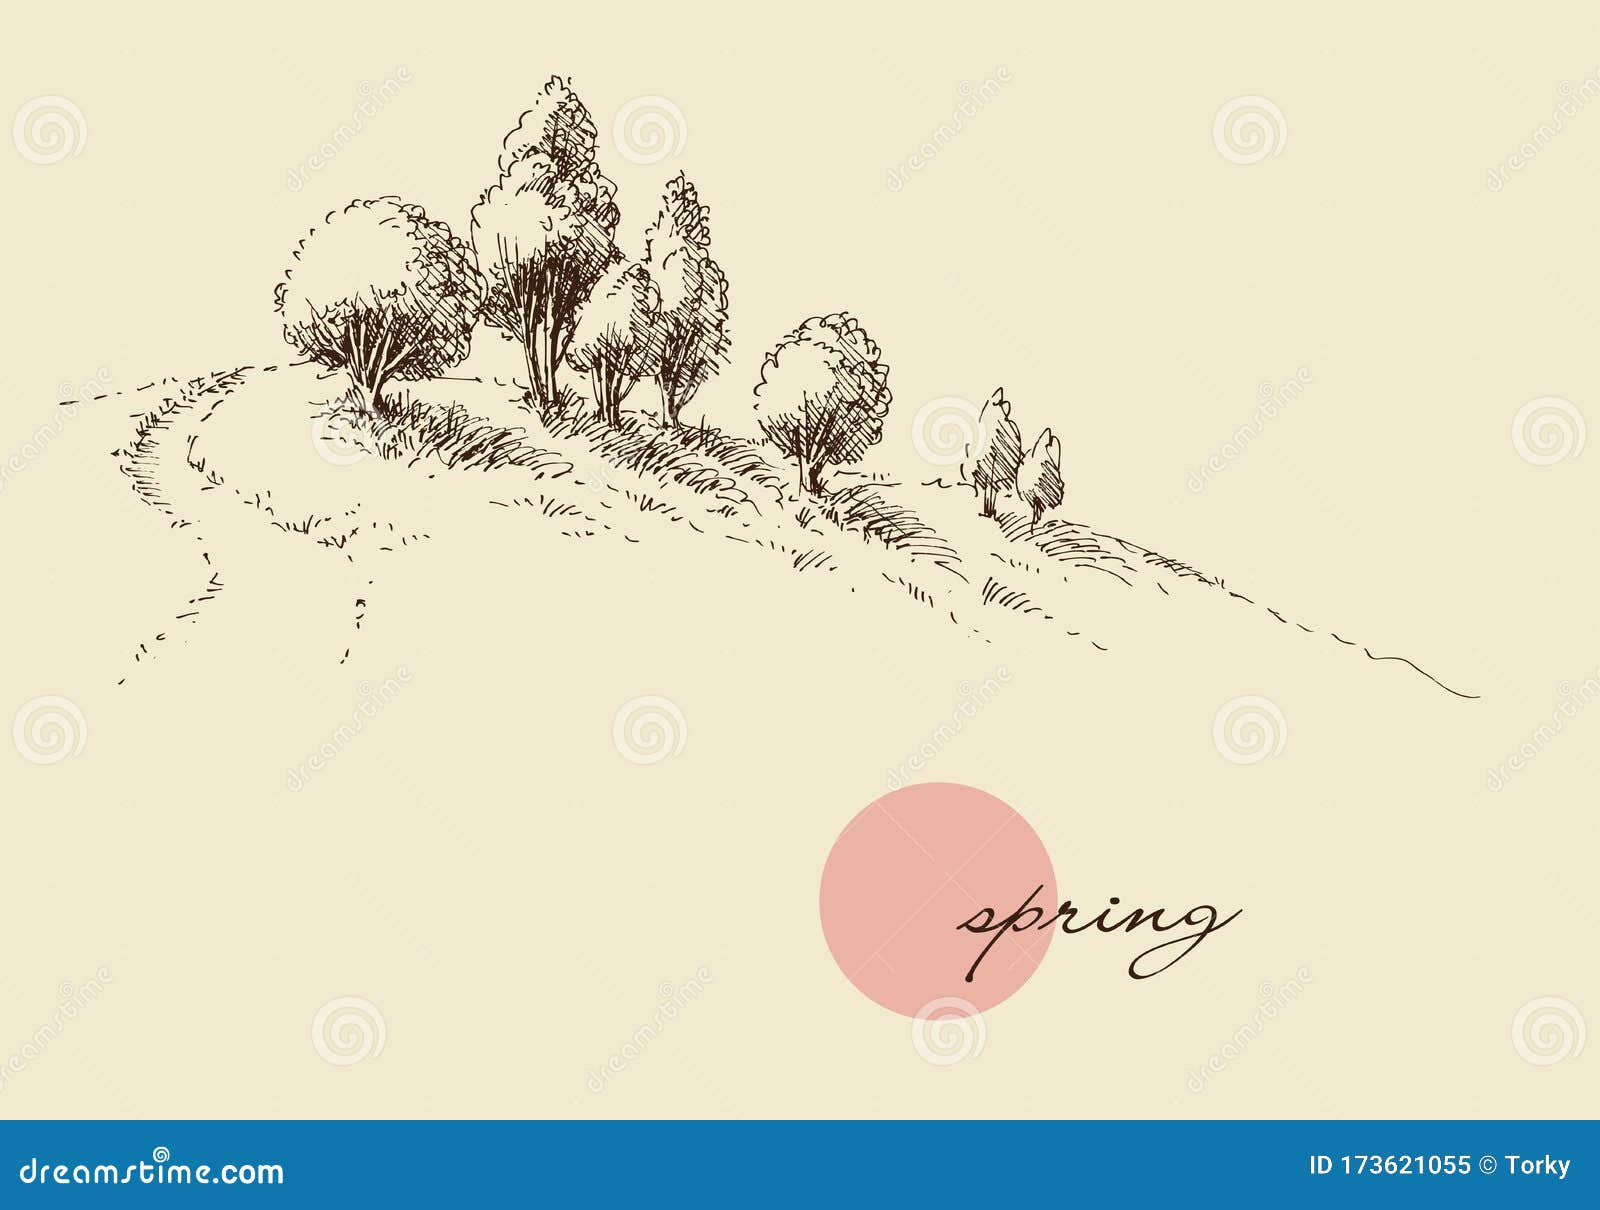 Spring Nature Wallpaper, Trees on a Hill Sketch Stock Vector - Illustration  of hike, hill: 173621055